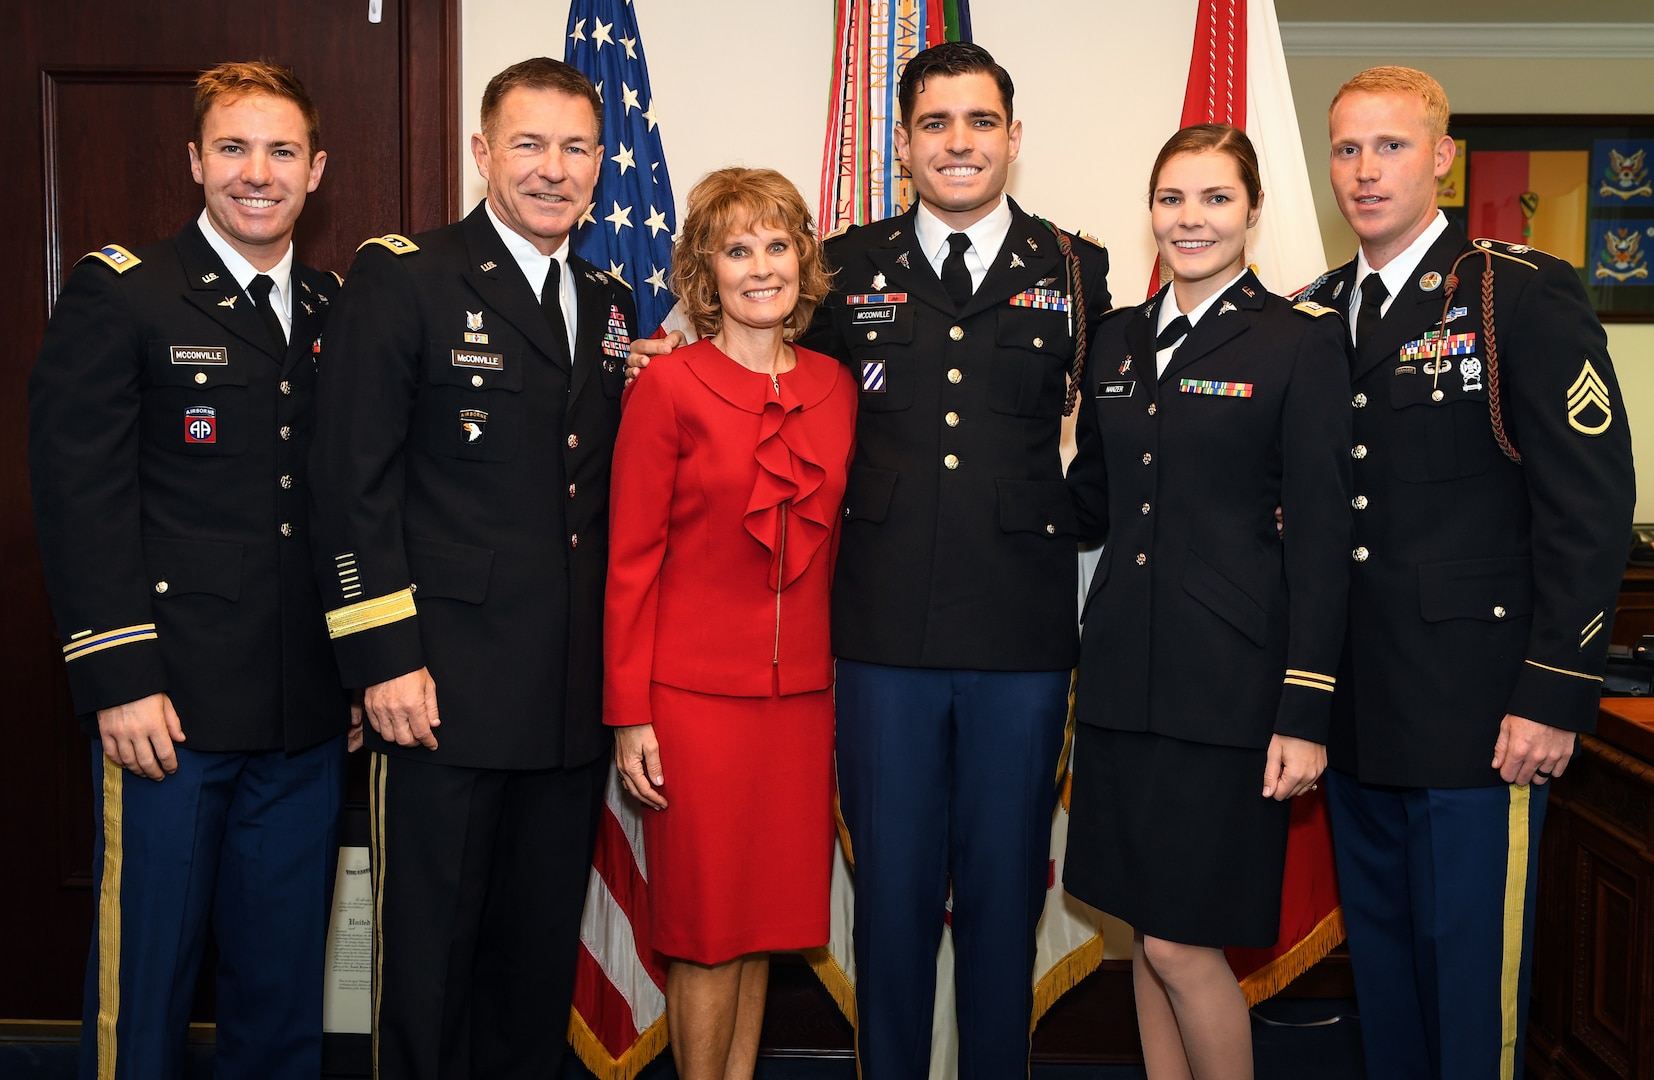 The family of U.S. Army Gen. James C. McConville poses for a photo during a promotion ceremony in honor of his son, Capt. Ryan McConville, in his office at the Pentagon in Arlington, Virginia, May 2, 2019.